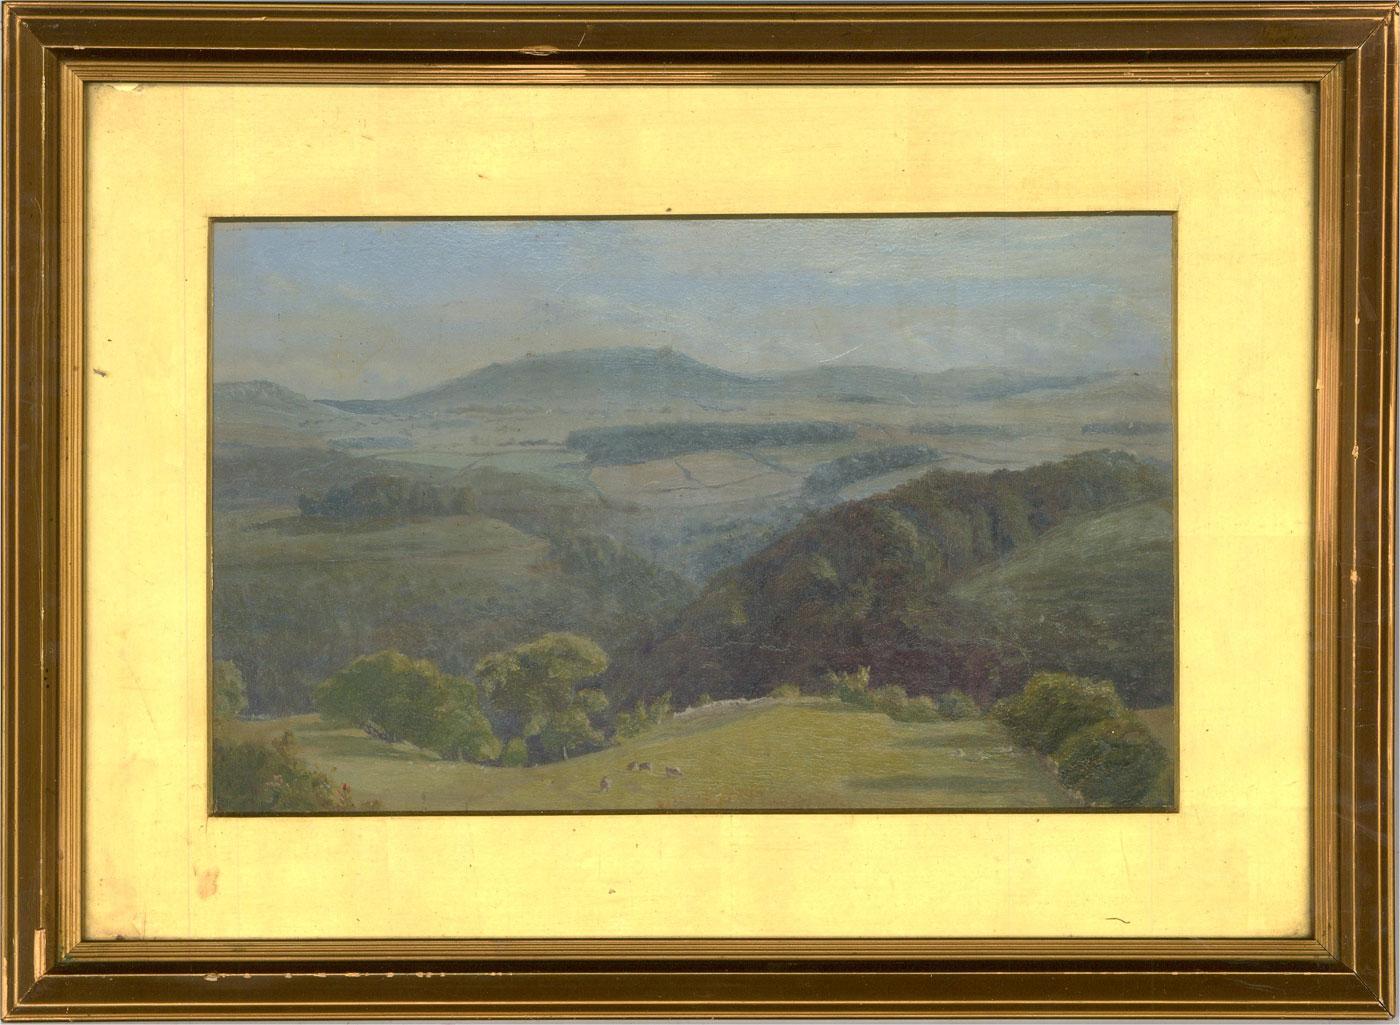 A charming oil showing the beautiful rolling hills of England at the height of summer. The distant horizon fades into the hazy heat and sheep graze in the verdant grasses in the foreground. The painting is unsigned and presented in a gilt effect